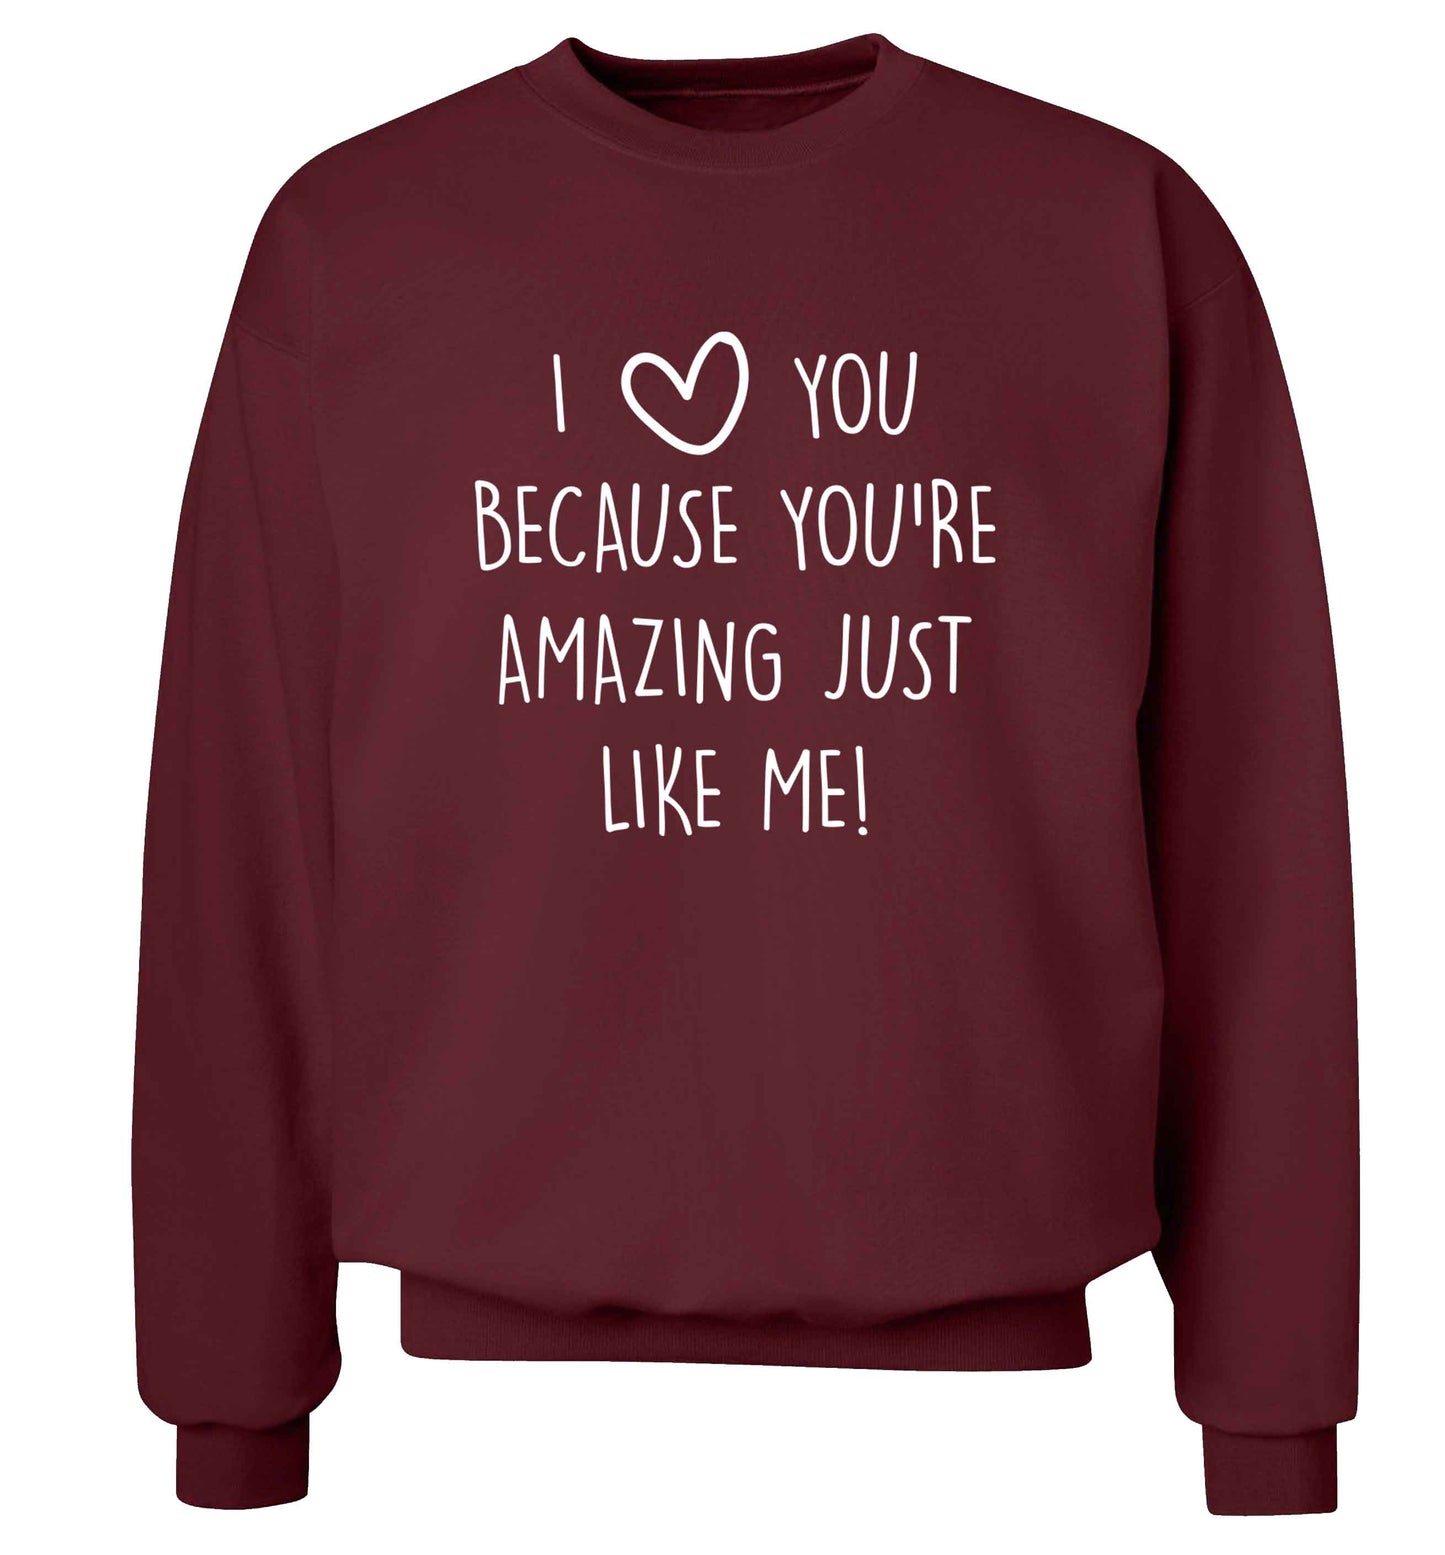 I love you because you're amazing just like me adult's unisex maroon sweater 2XL